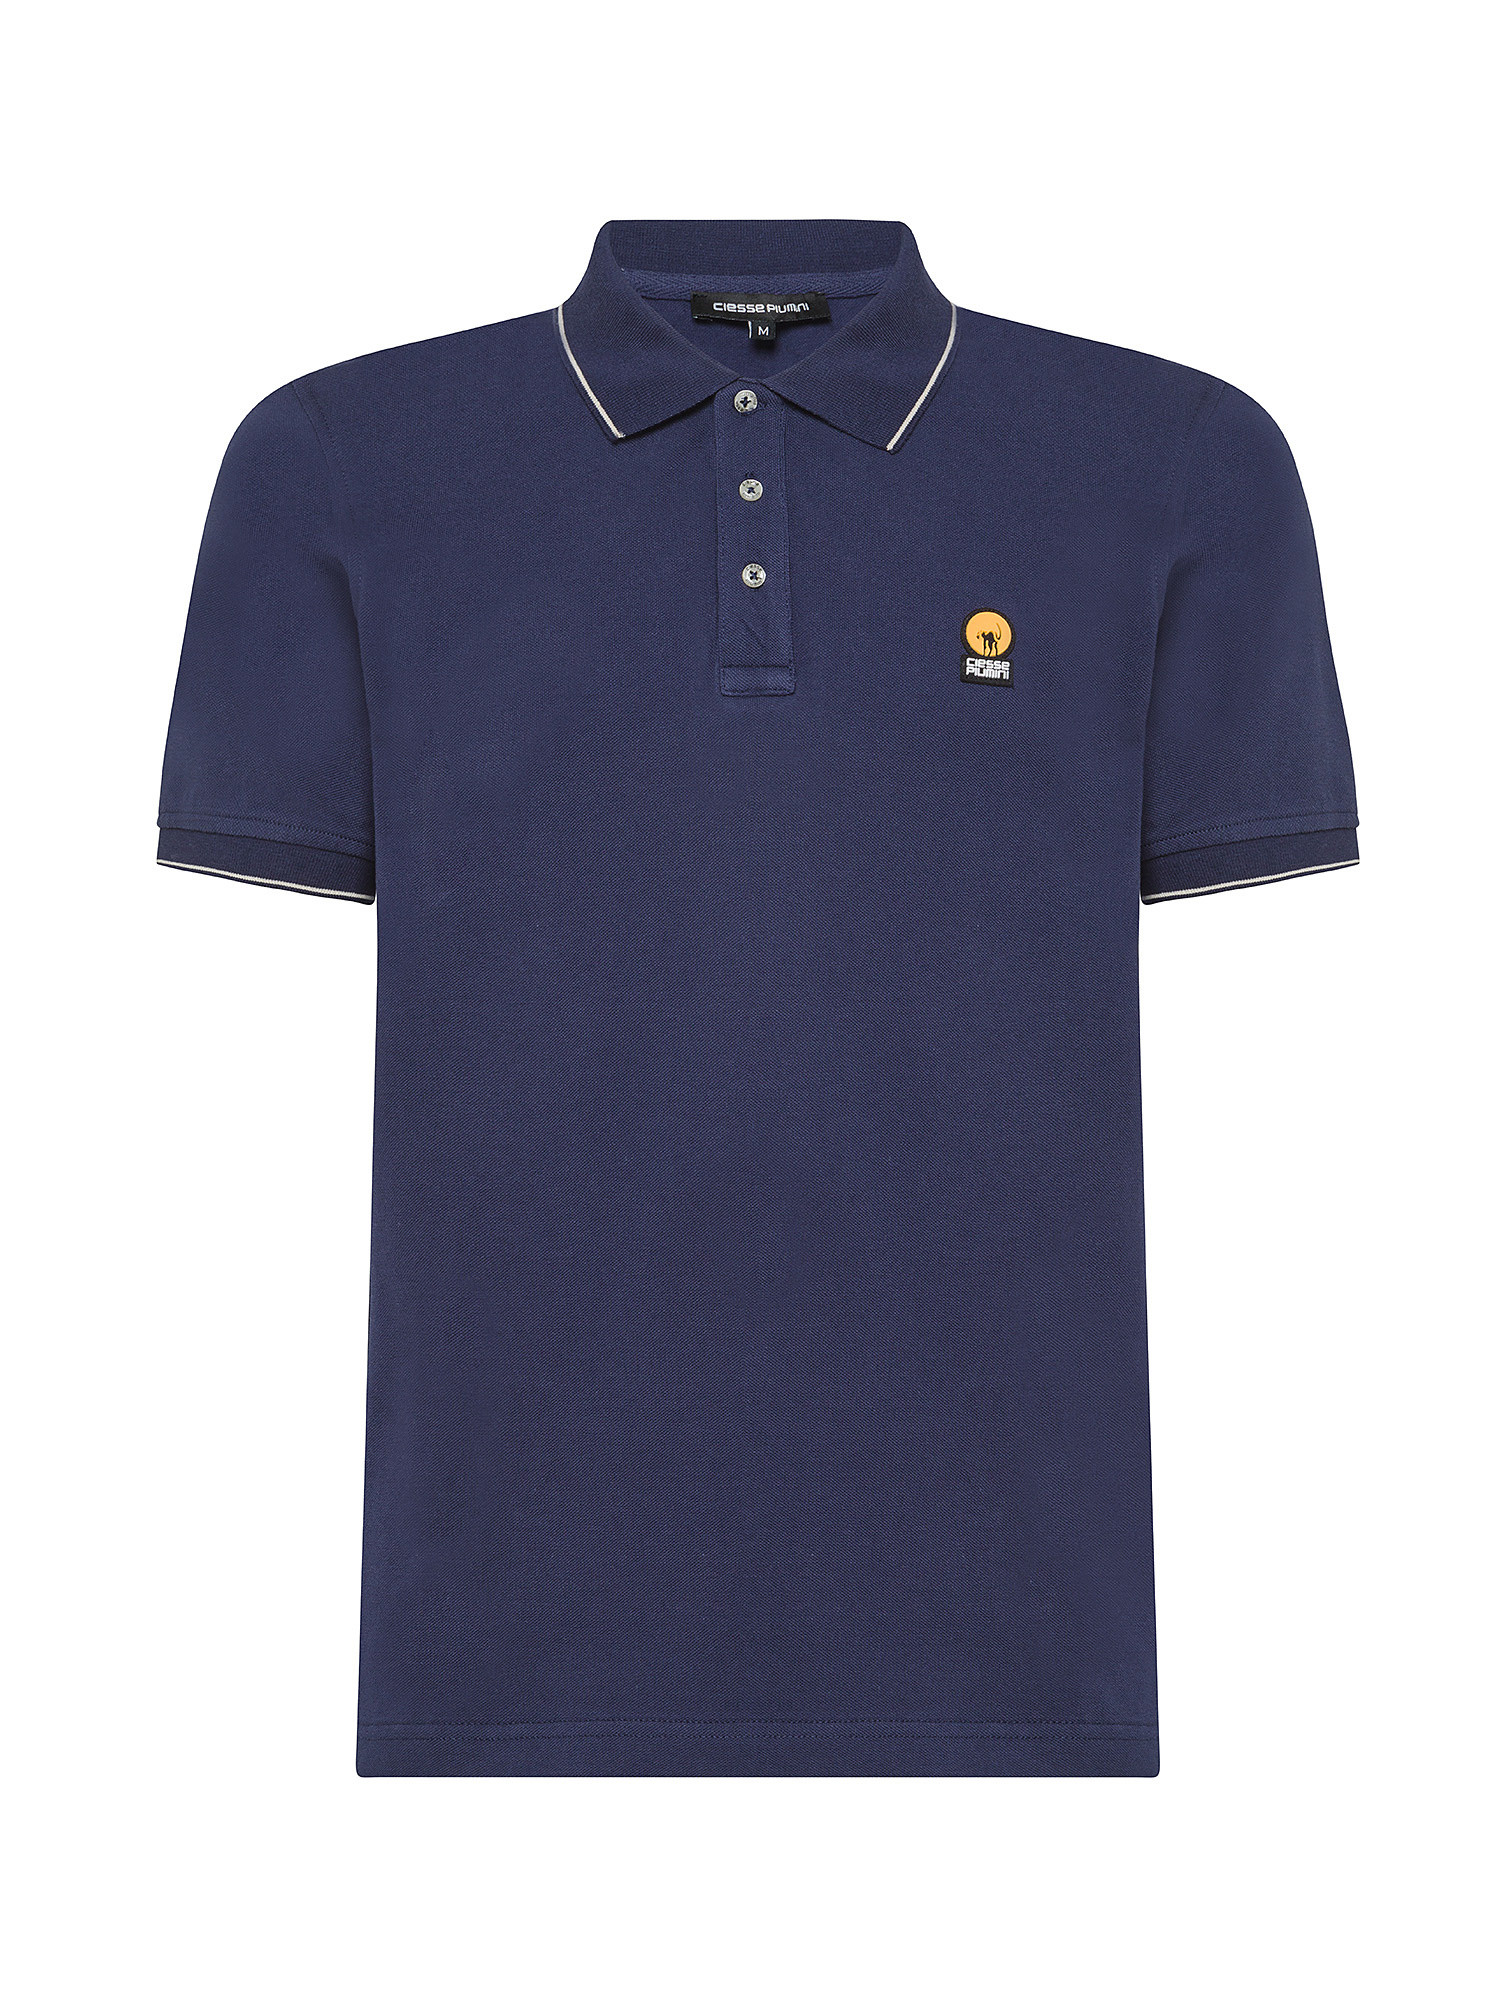 Ciesse Piumini - Piff polo shirt in cotton with logo, Blue, large image number 0